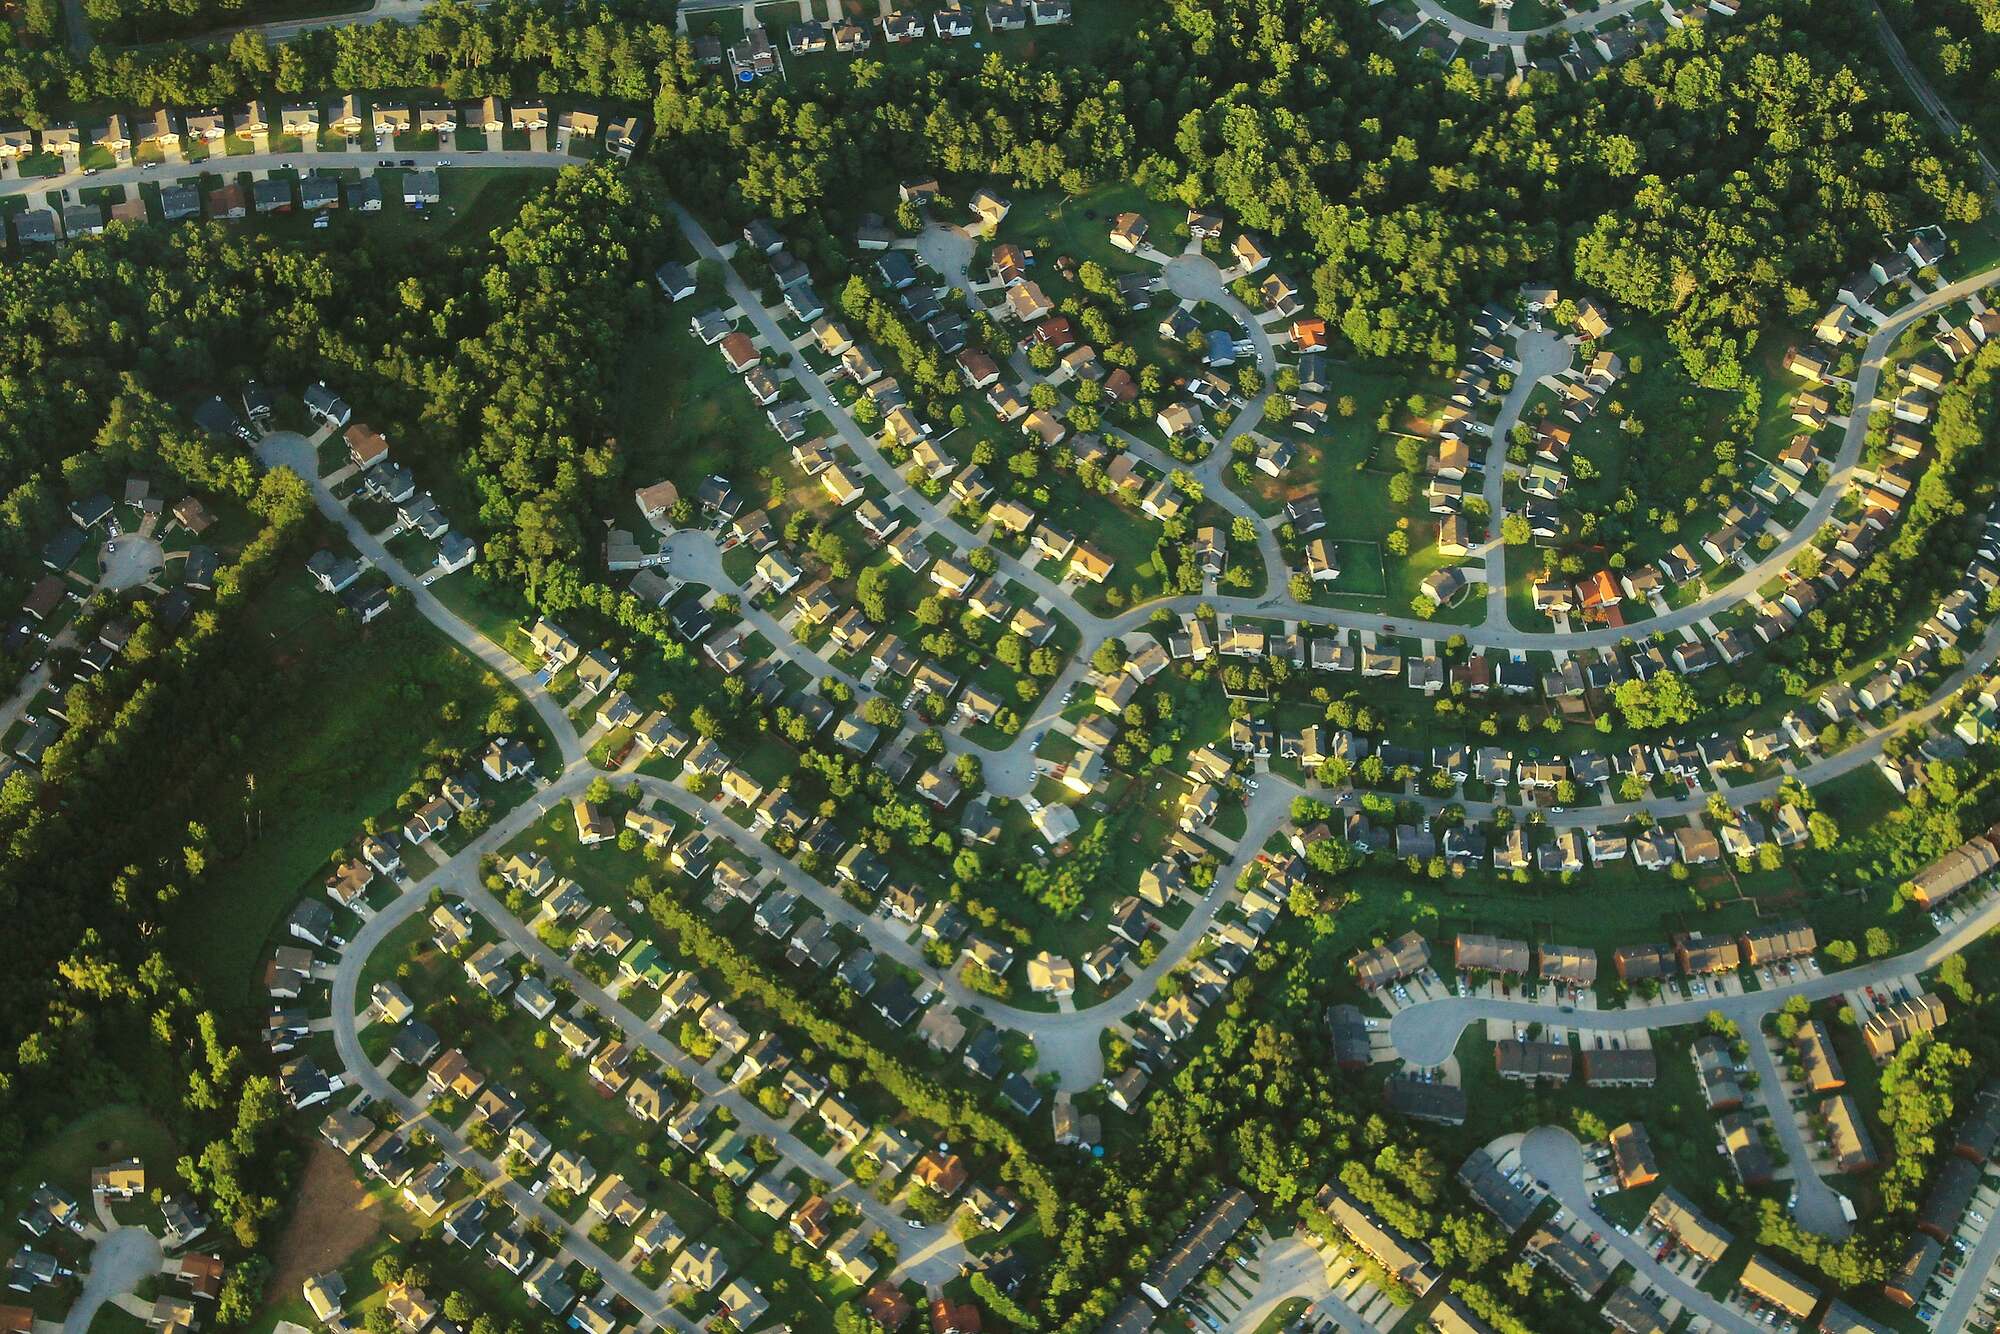 Aerial photograph showing a residential neighborhood near Atlanta with curving streets and closely spaced houses. Green lawns and trees are growing around the houses.